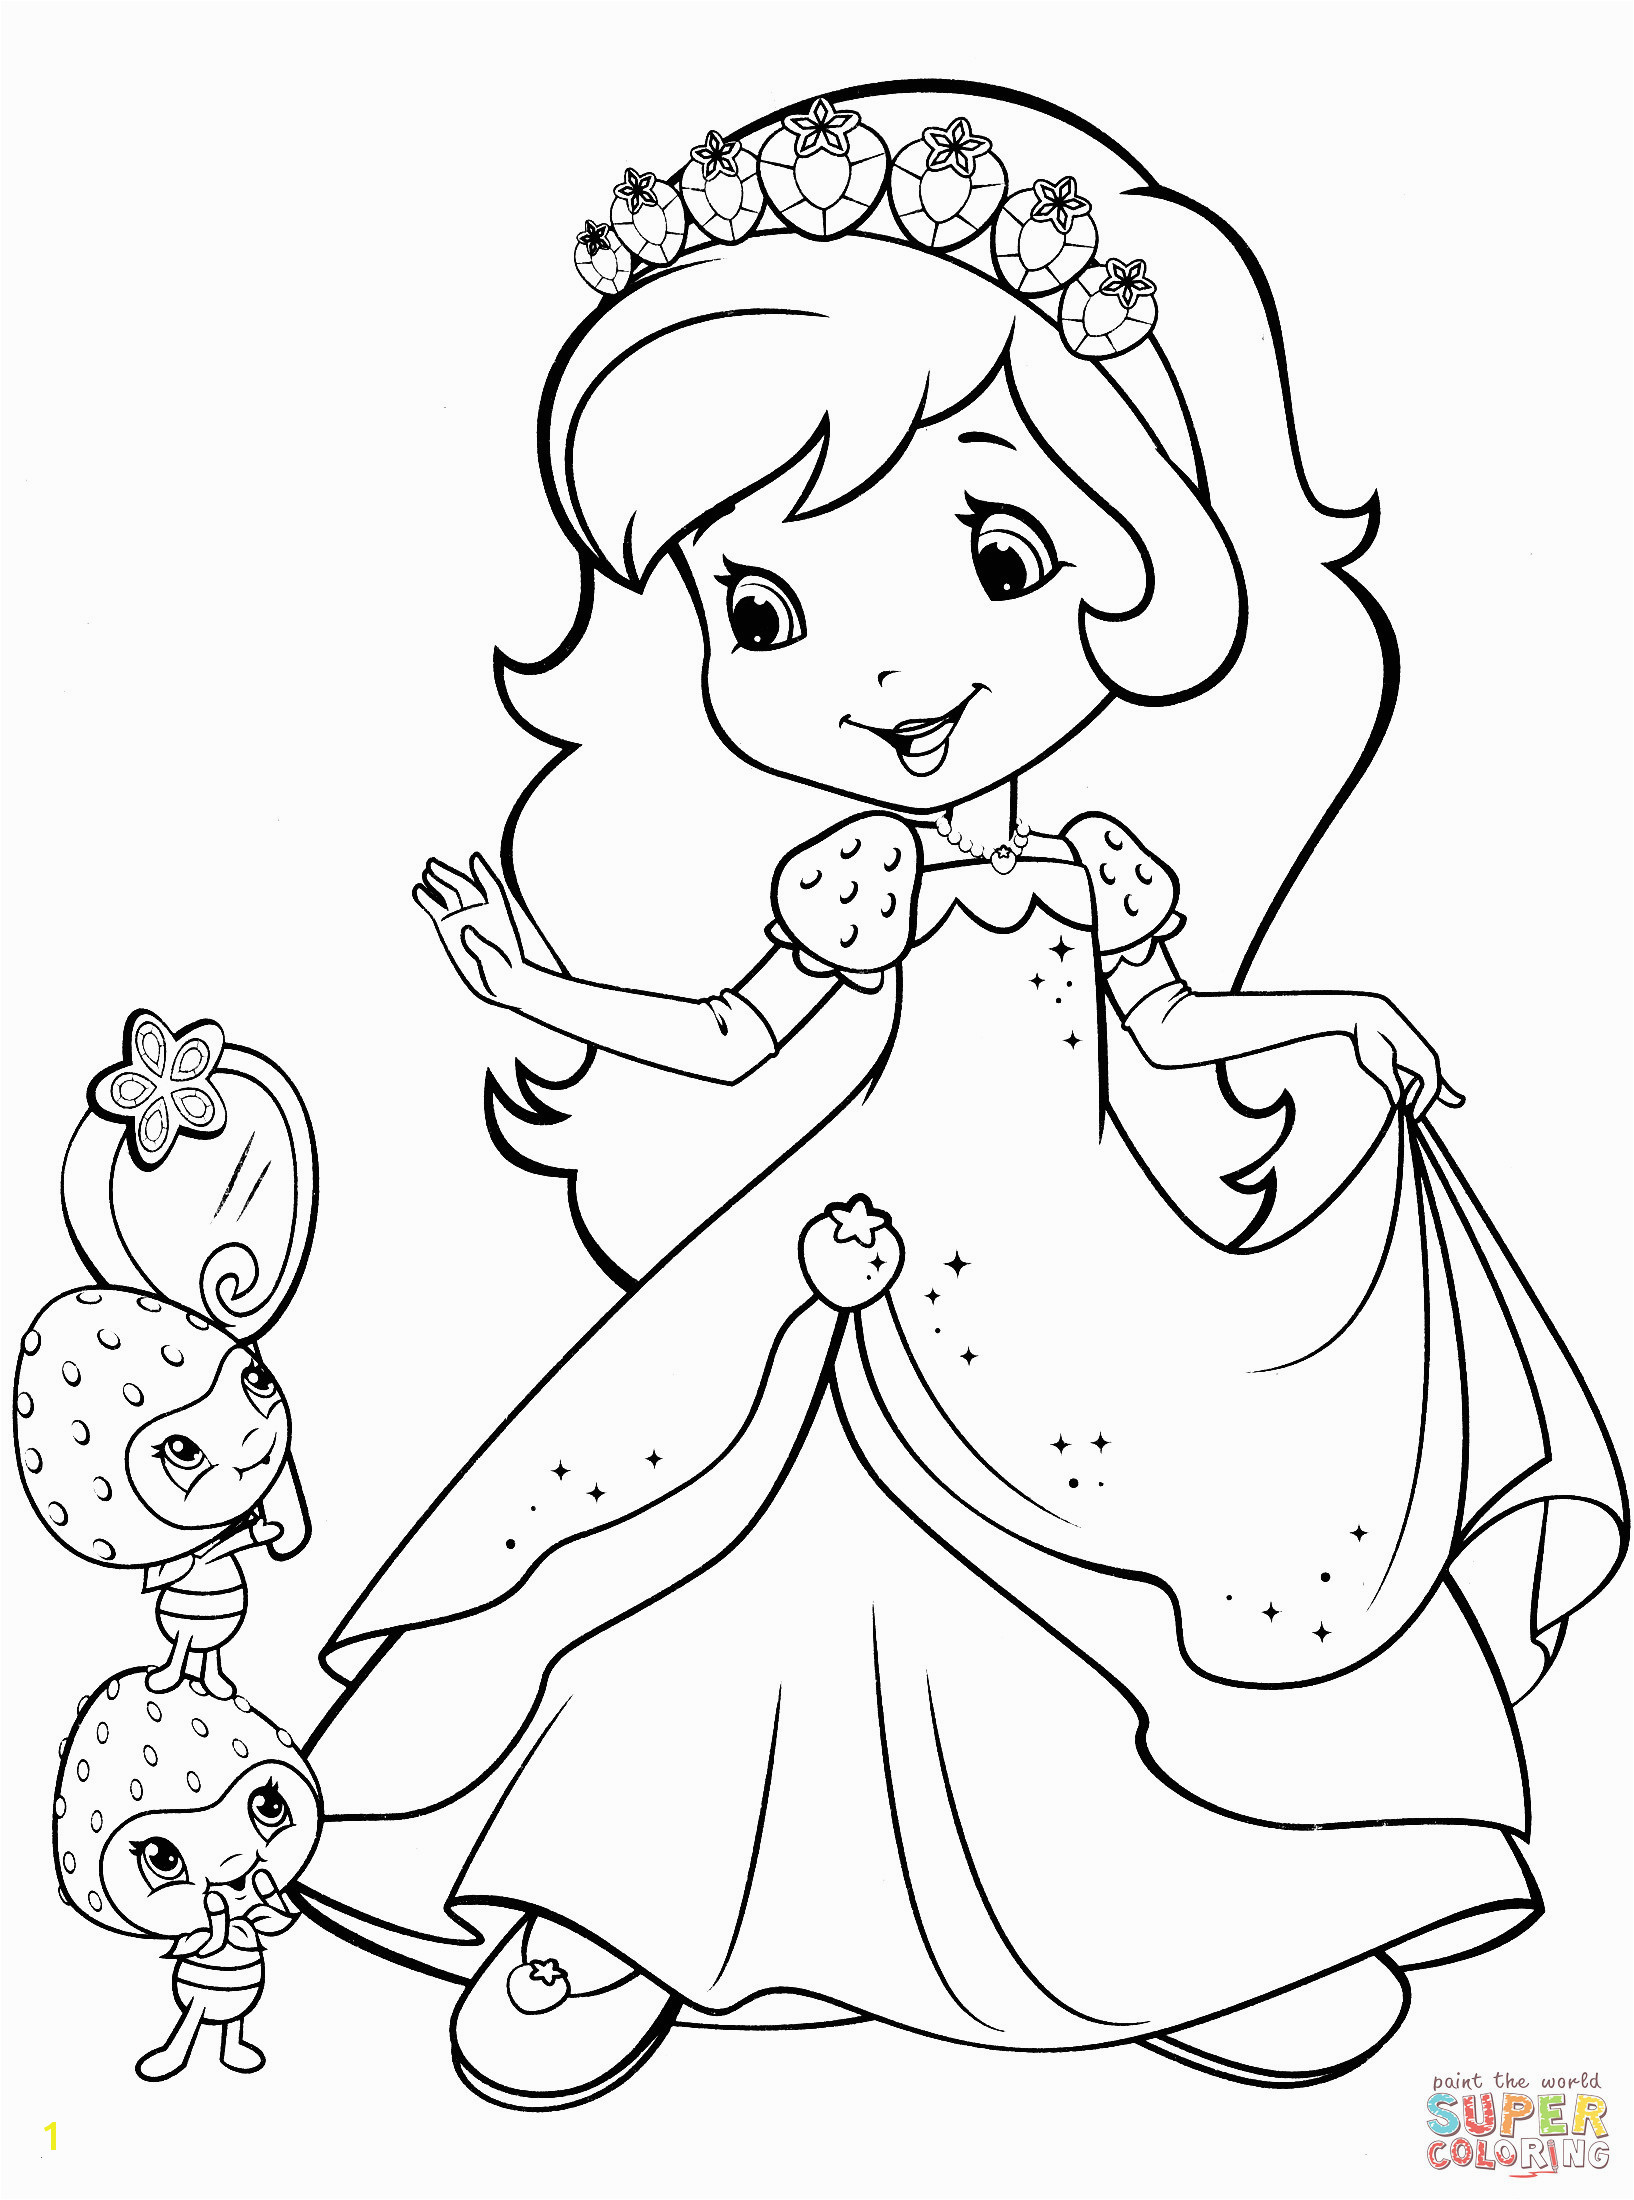 Strawberry Shortcake Doll Coloring Pages Amazing Strawberry Shortcake Coloring Page Verikira